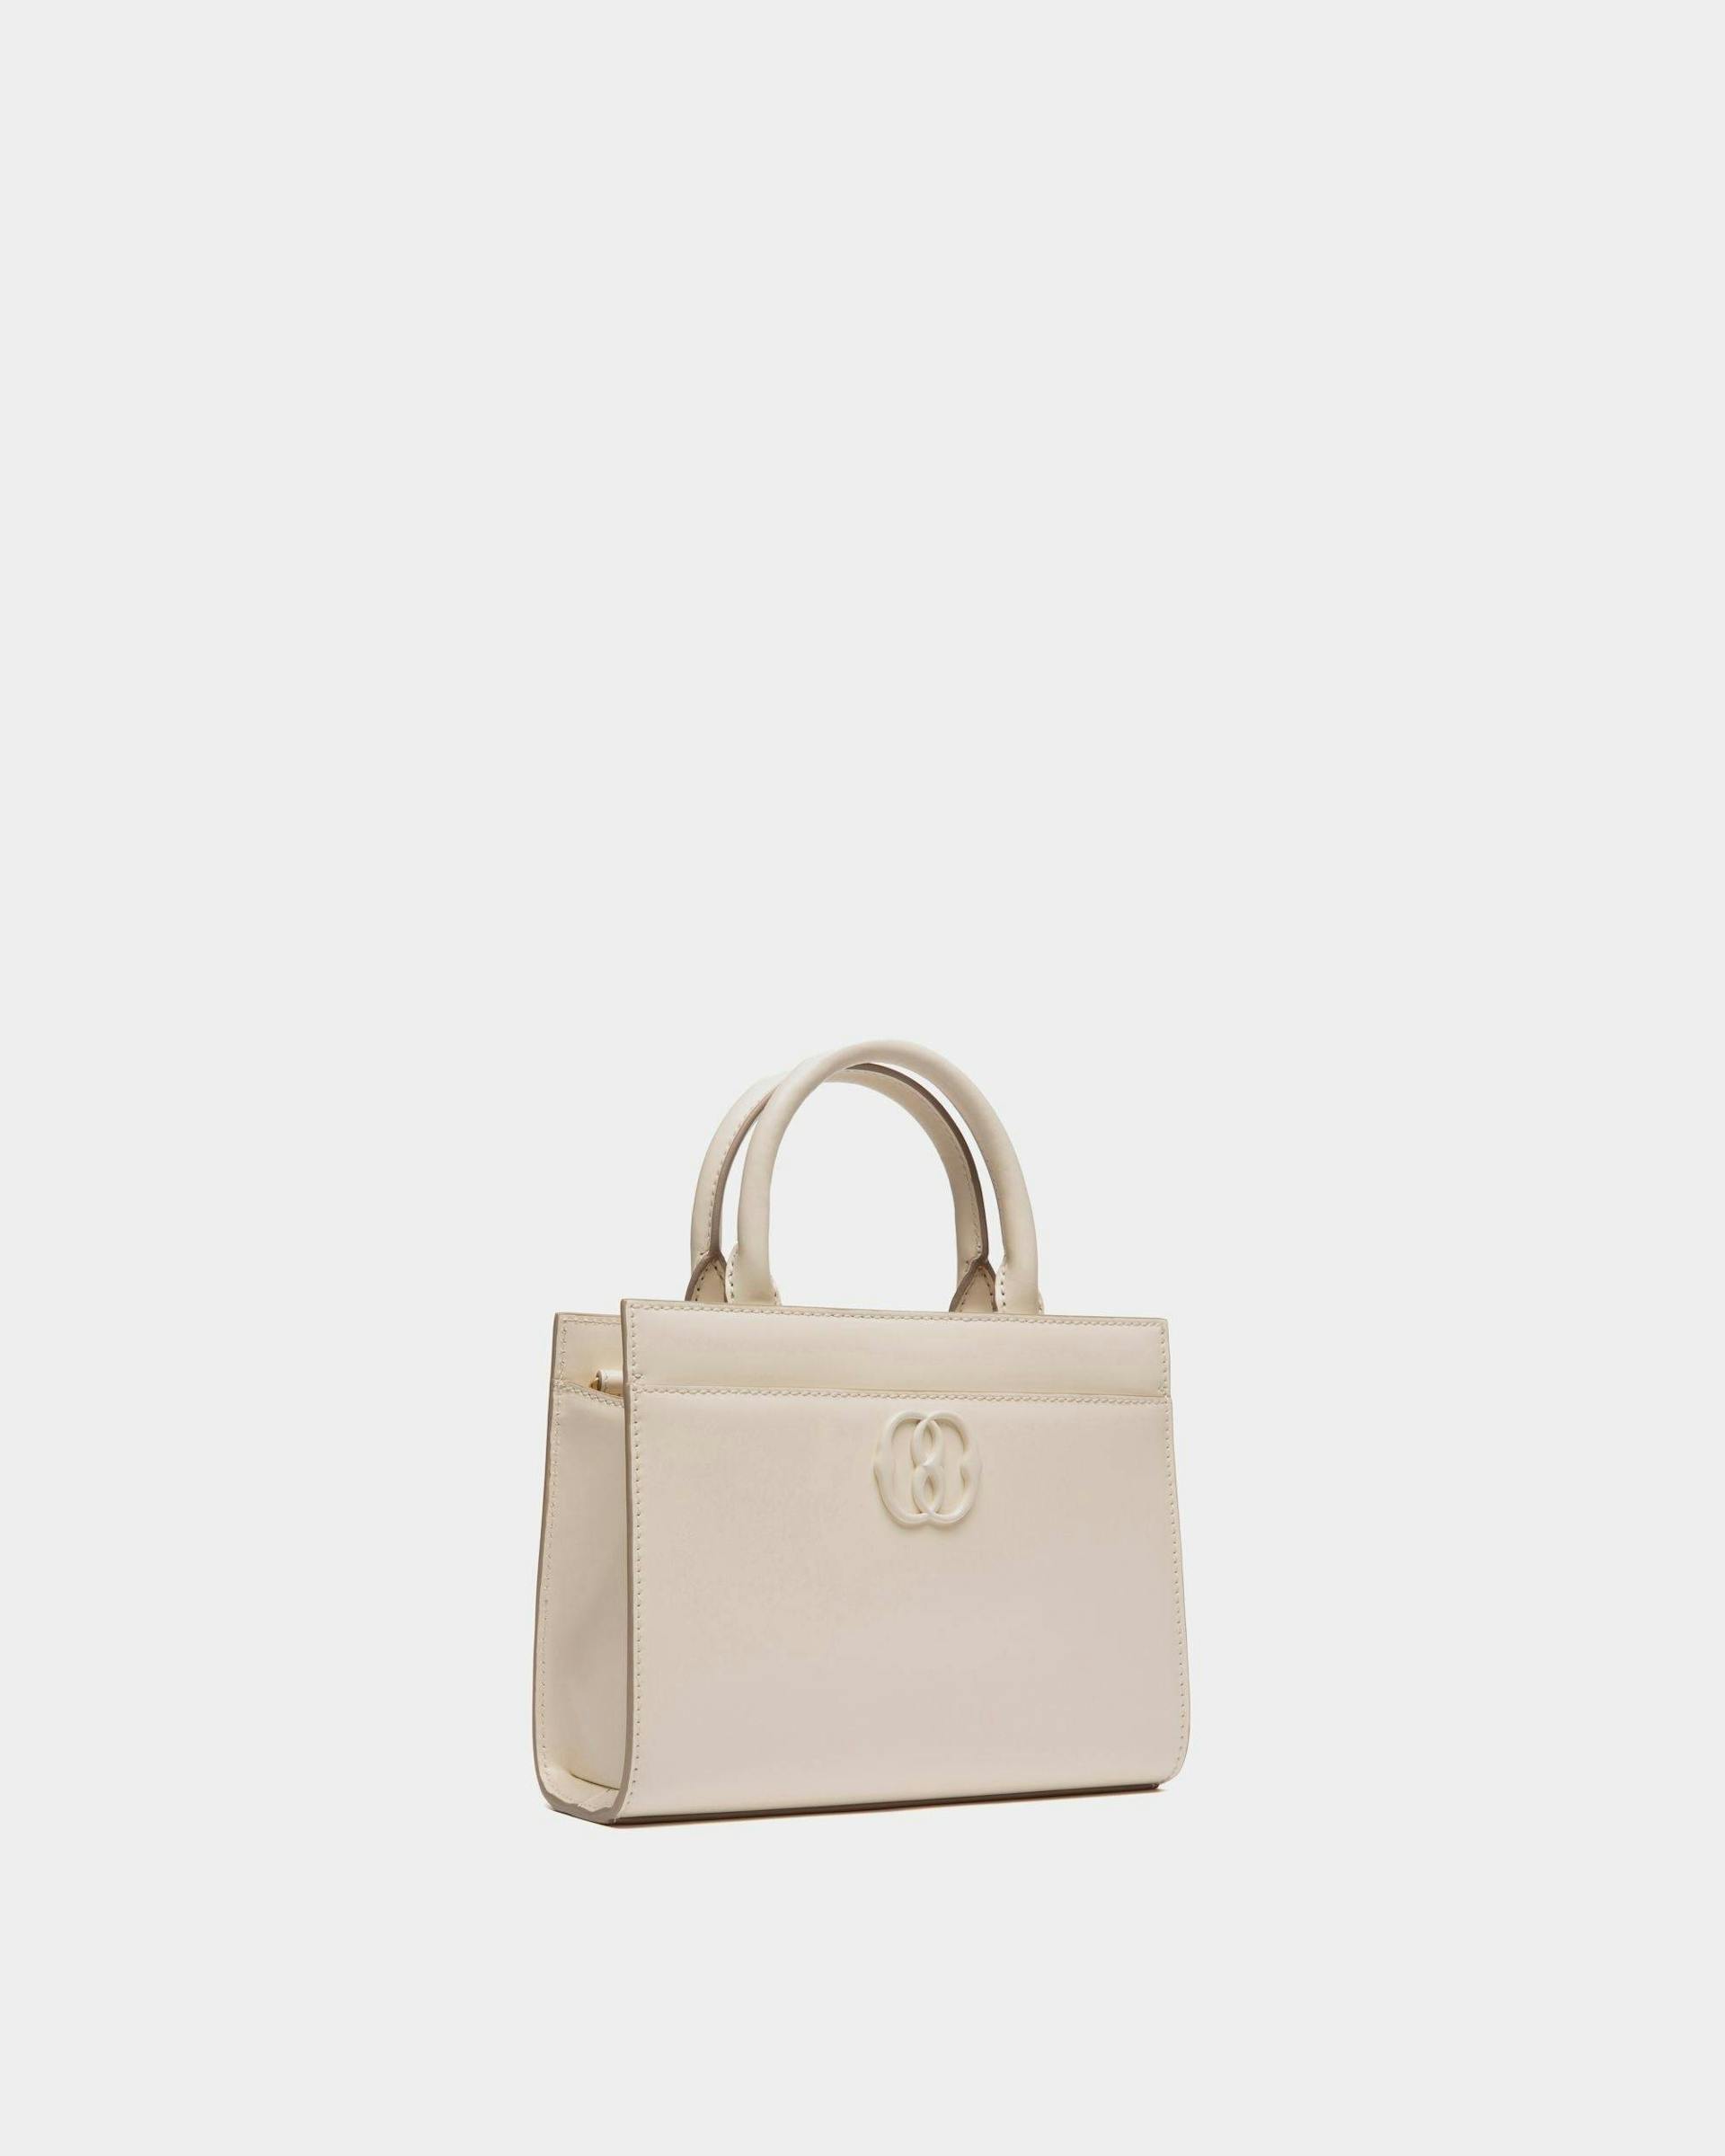 Women's Emblem Small Tote Bag in White Patent Leather | Bally | Still Life 3/4 Front